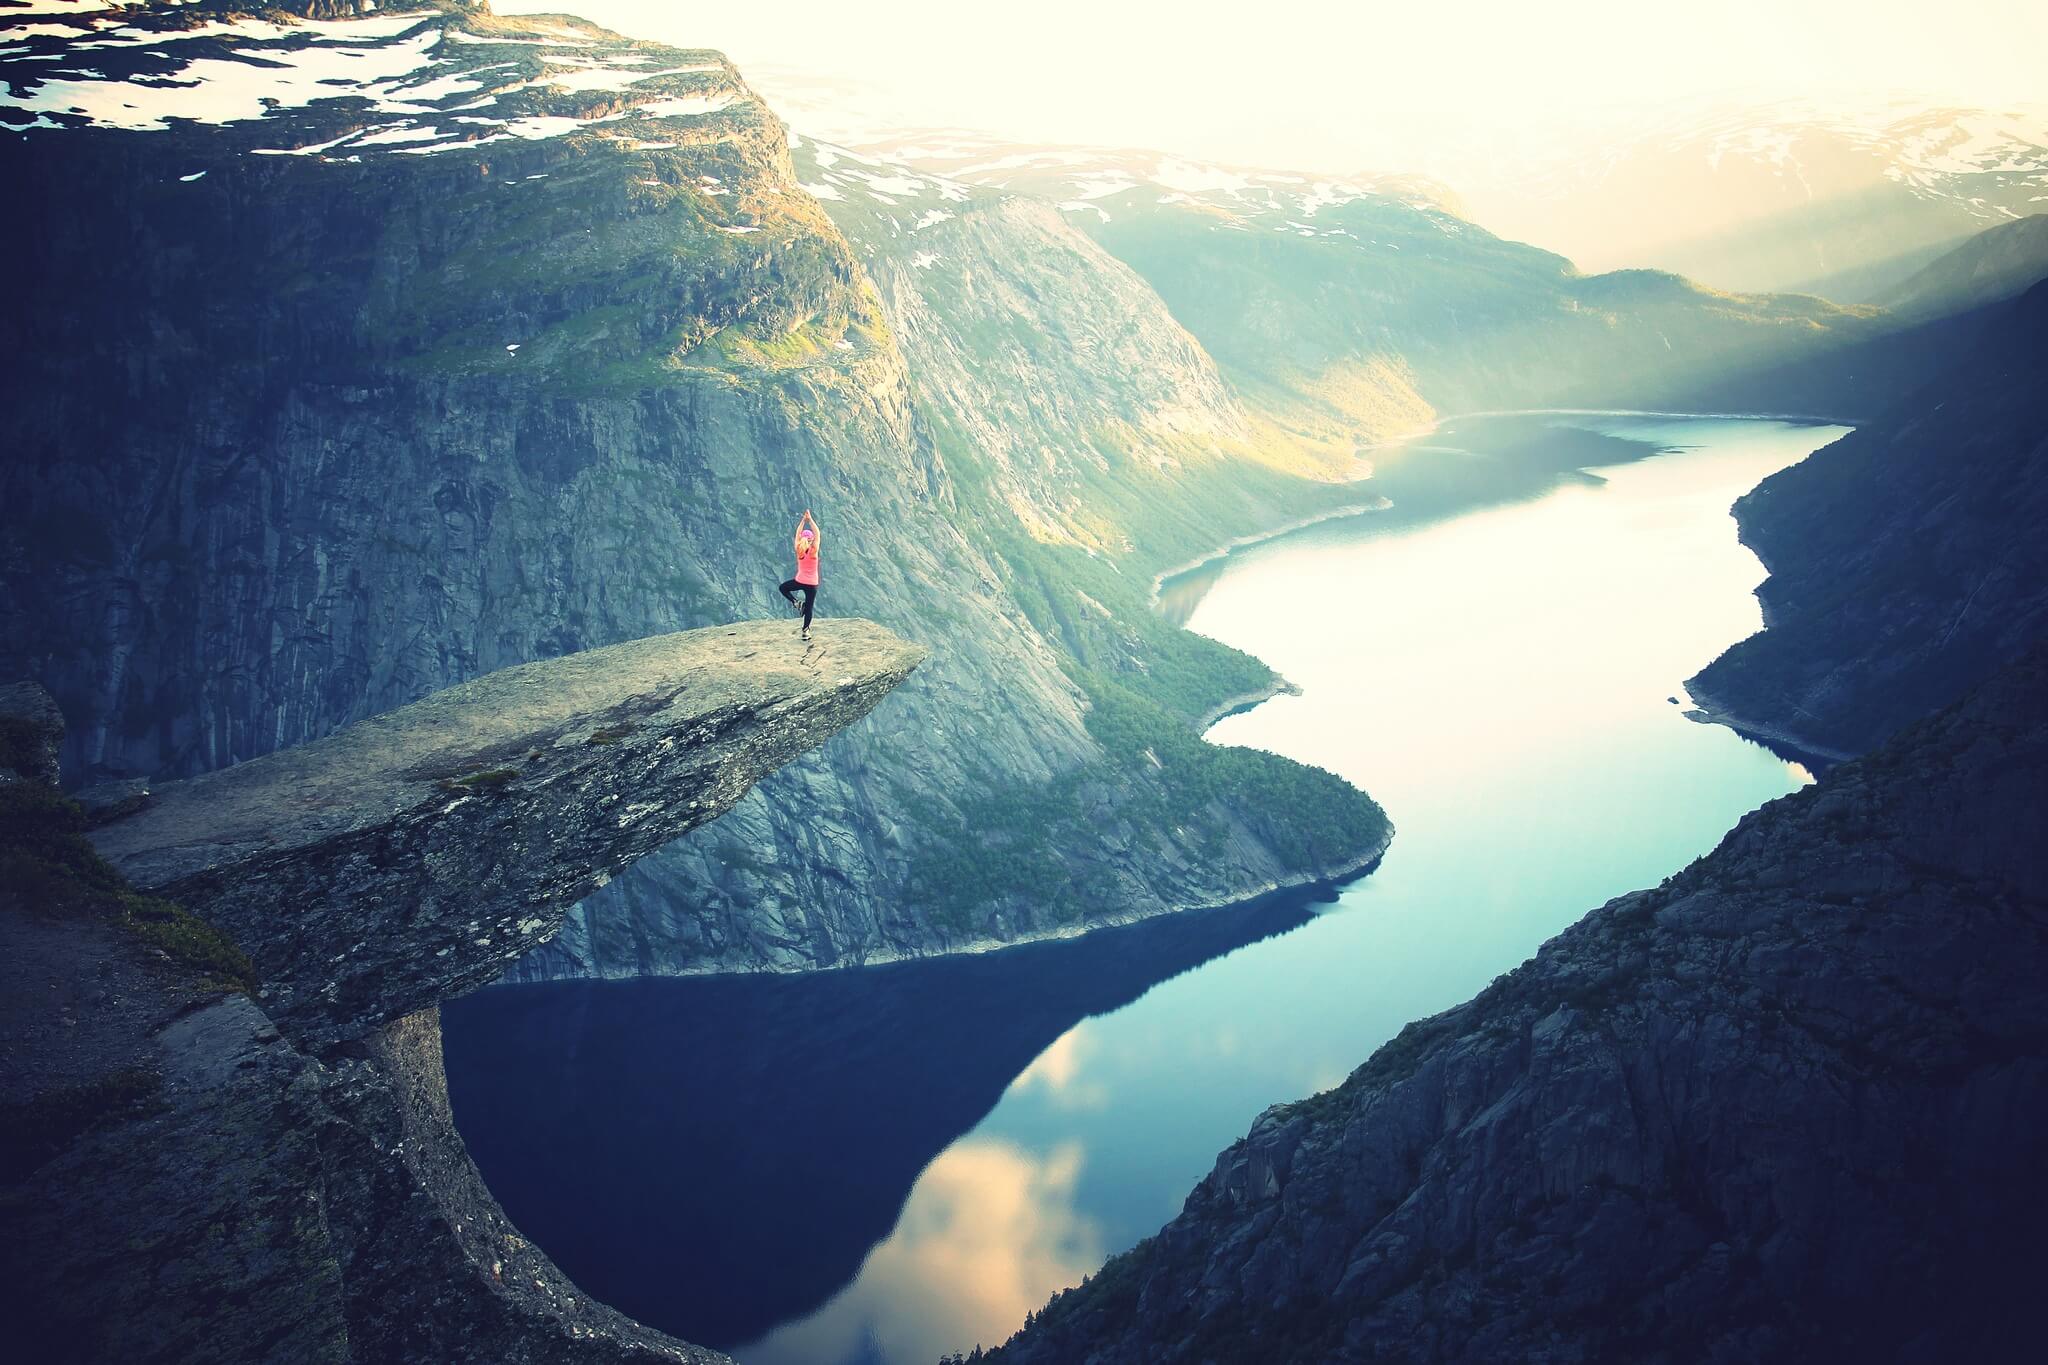 Someone standing in a yoga pose on a very scenic mountain ledge over looking a large lake